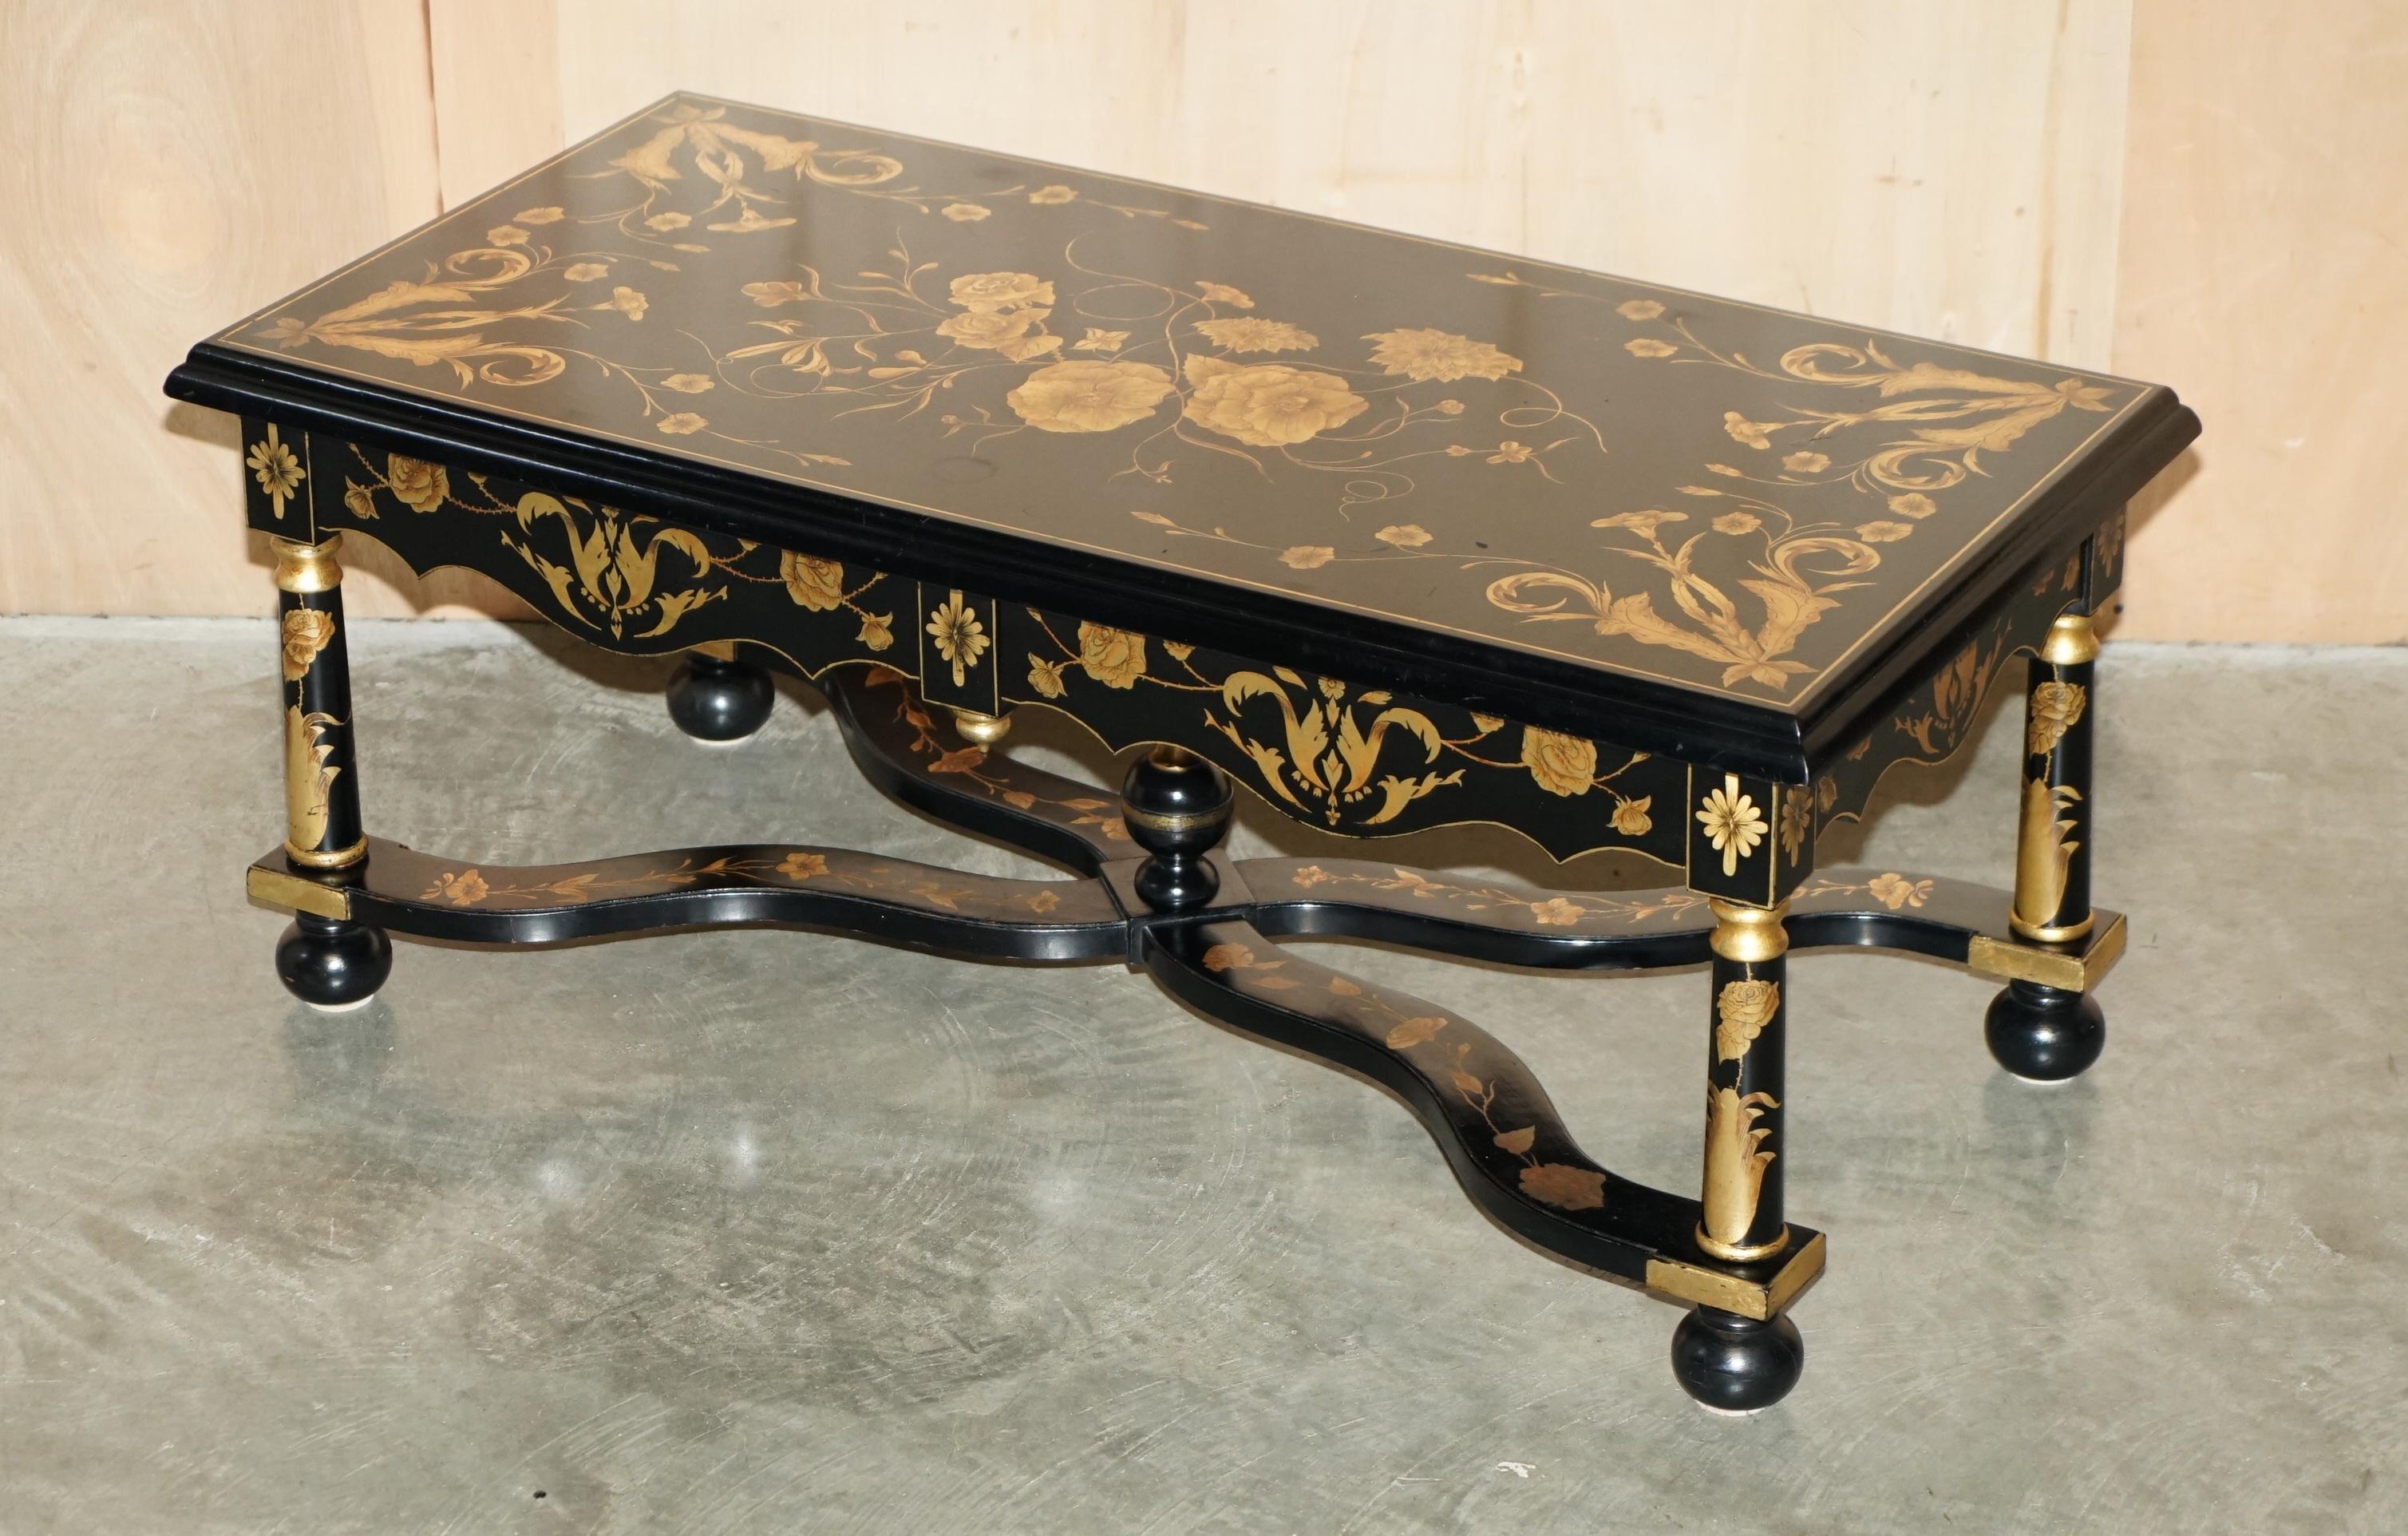 Royal House Antiques

Royal House Antiques is delighted to offer for sale this lovely vintage hand lacquered Chinese coffee table with twin drawers

Please note the delivery fee listed is just a guide, it covers within the M25 only for the UK and